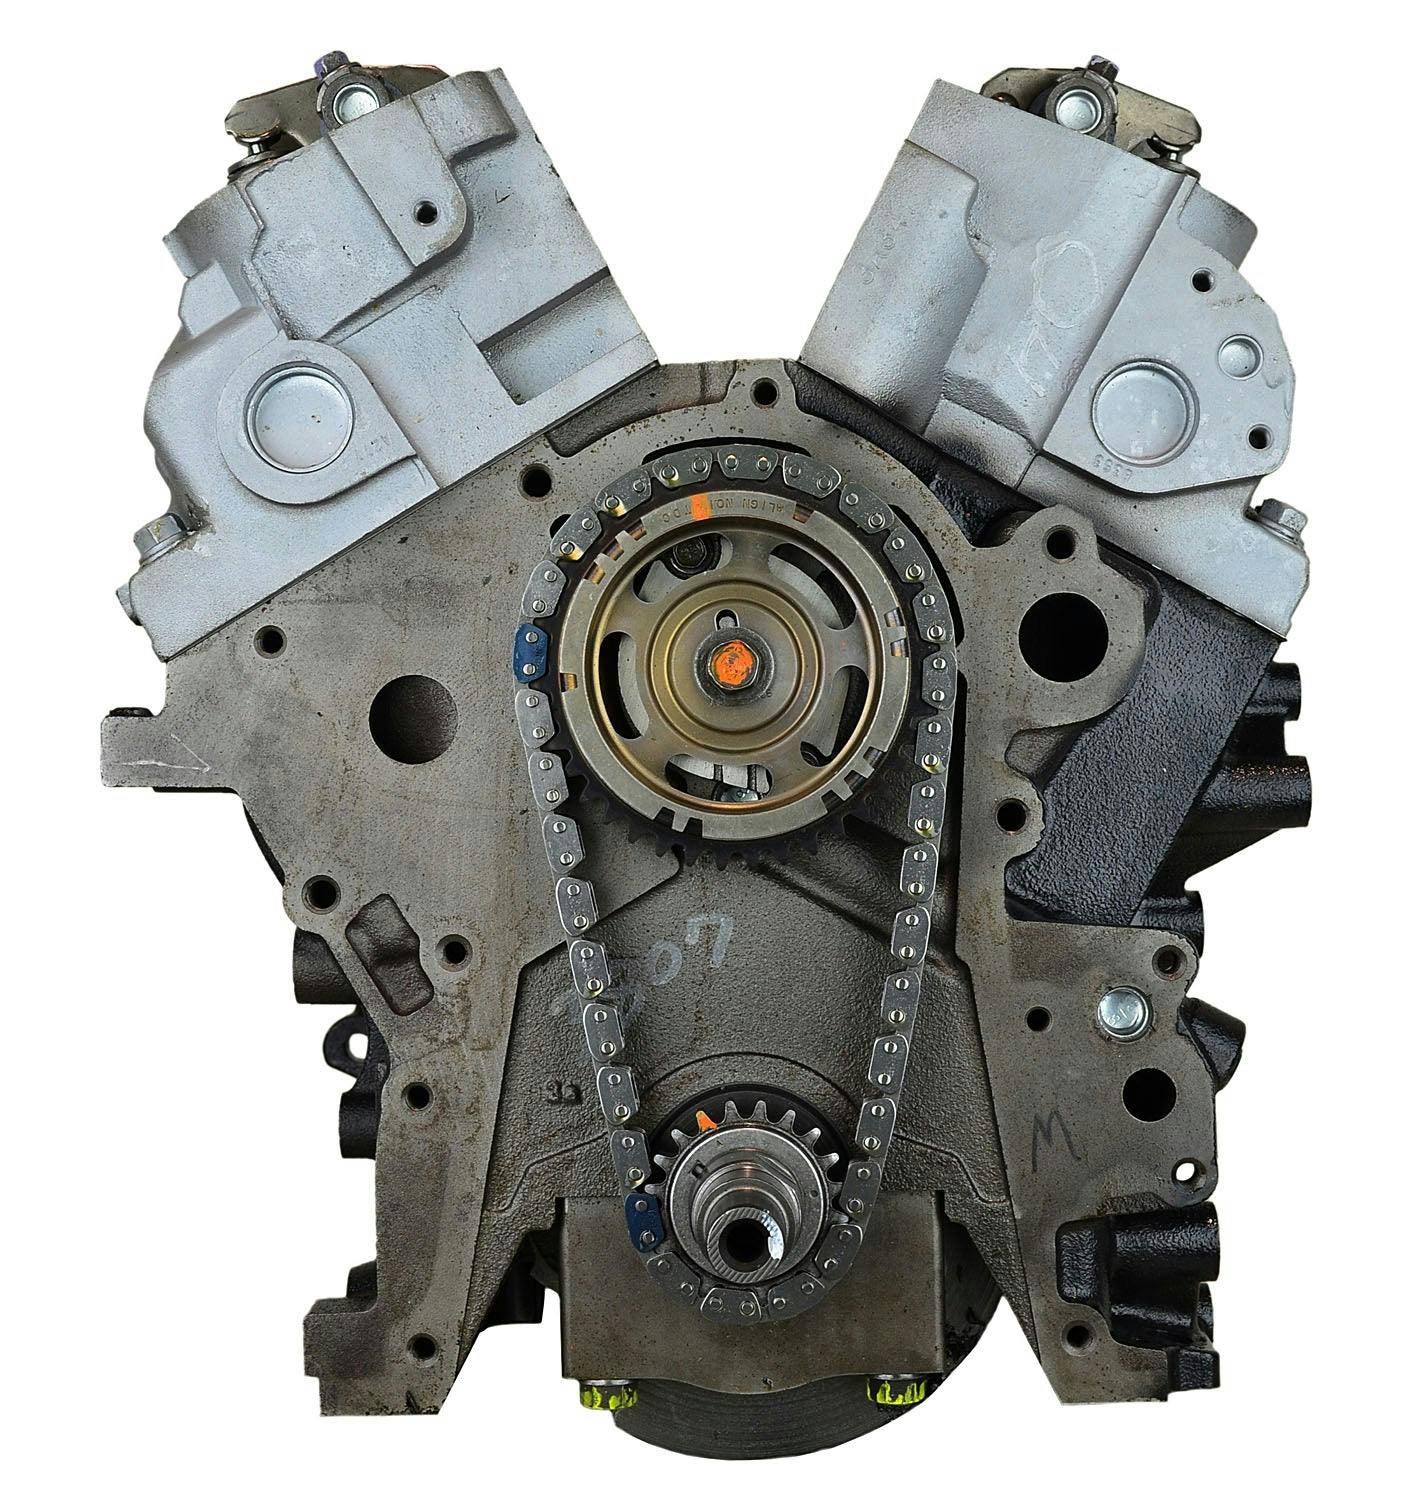 3.8L V6 Engine for 2007-2010 Chrysler Pacifica, Town & Country/Dodge Grand Caravan FWD